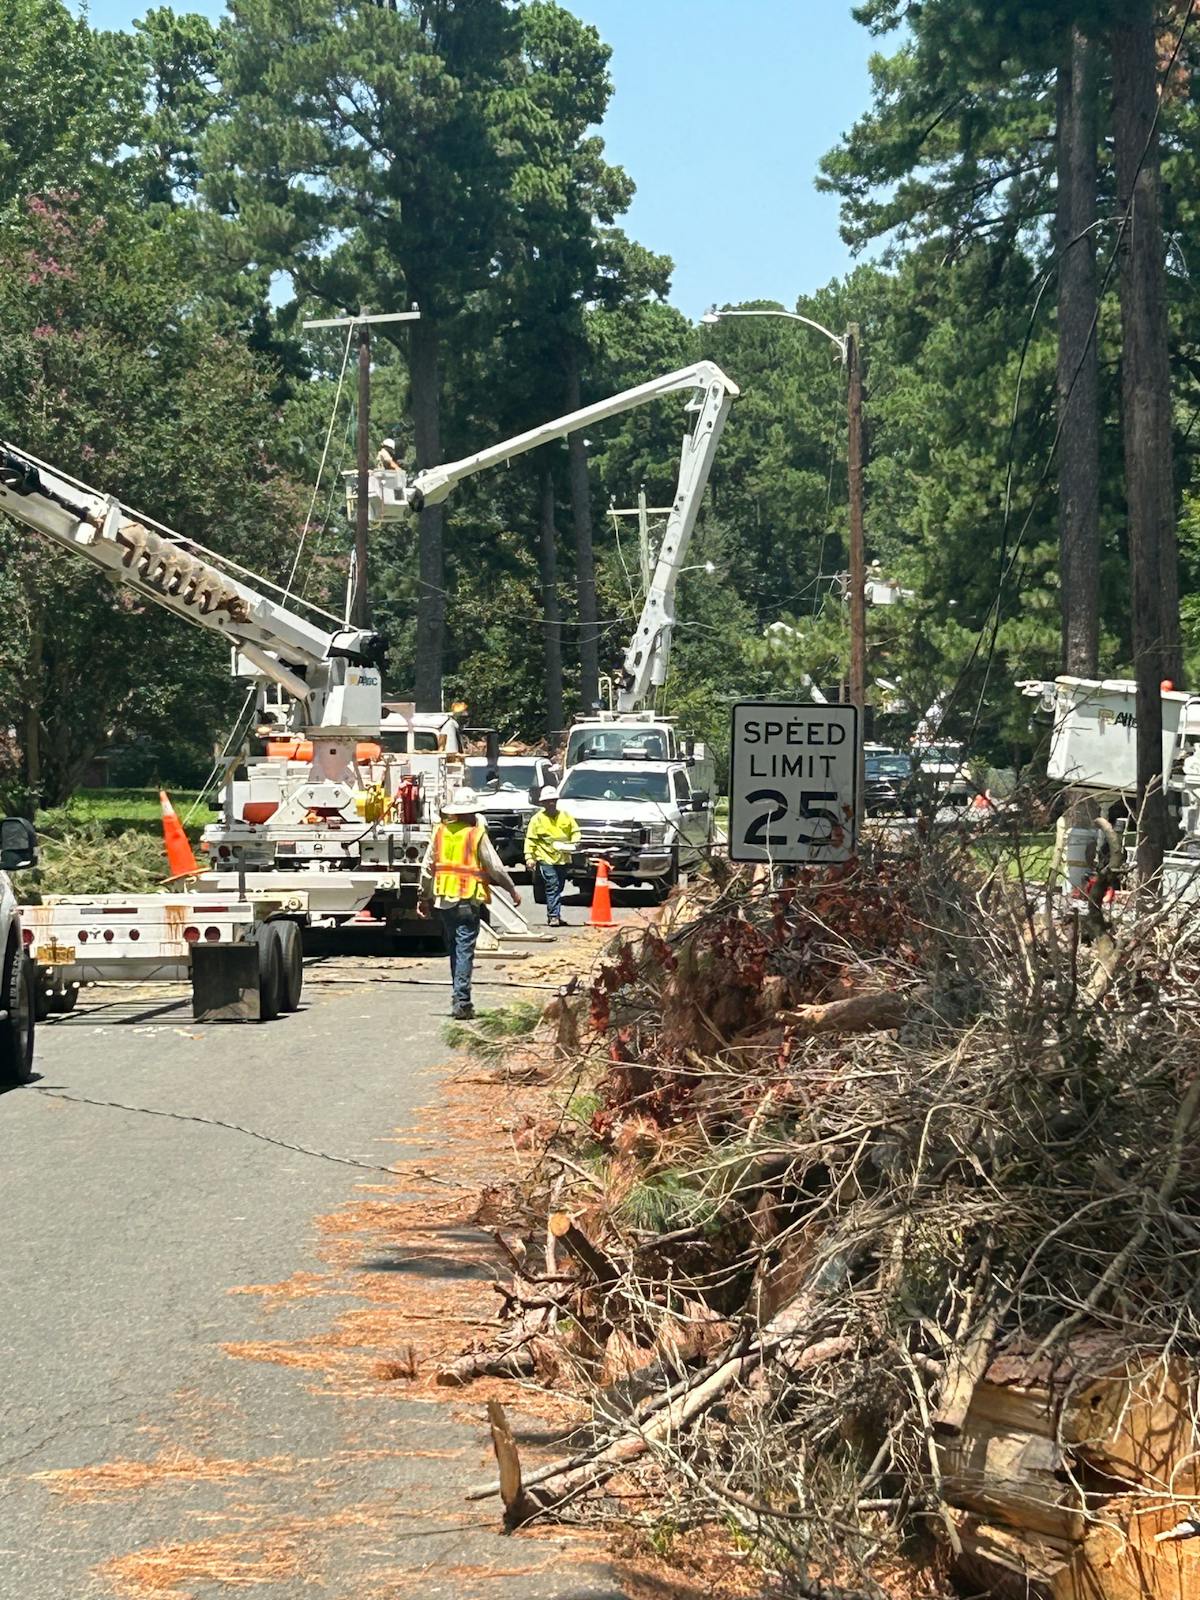 As of July 17, SWEPCO crews continued to work to restore power to the approximately 9,000 customers without electricity in Louisiana following the recent storm.